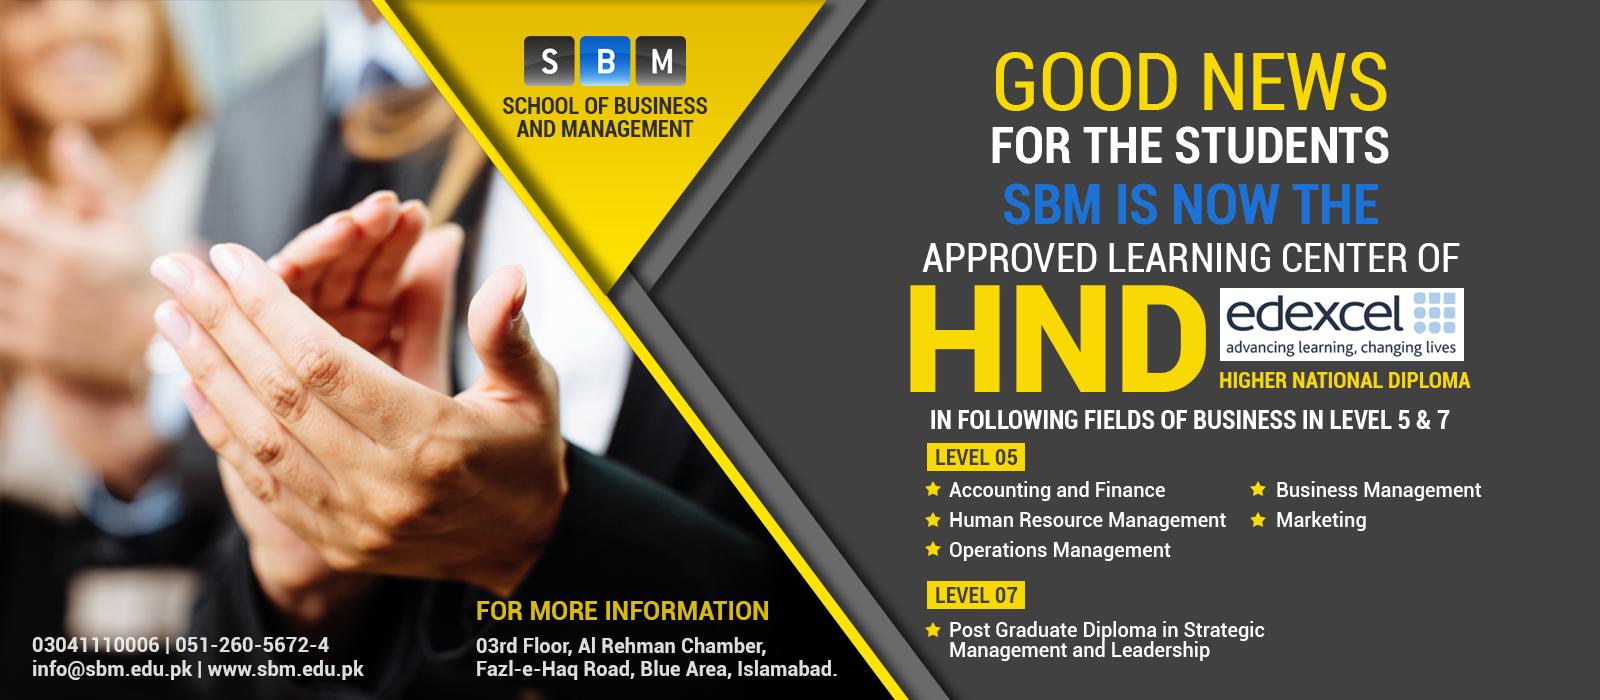 SBM is now Approved Learning Center of HND (Edexcel)